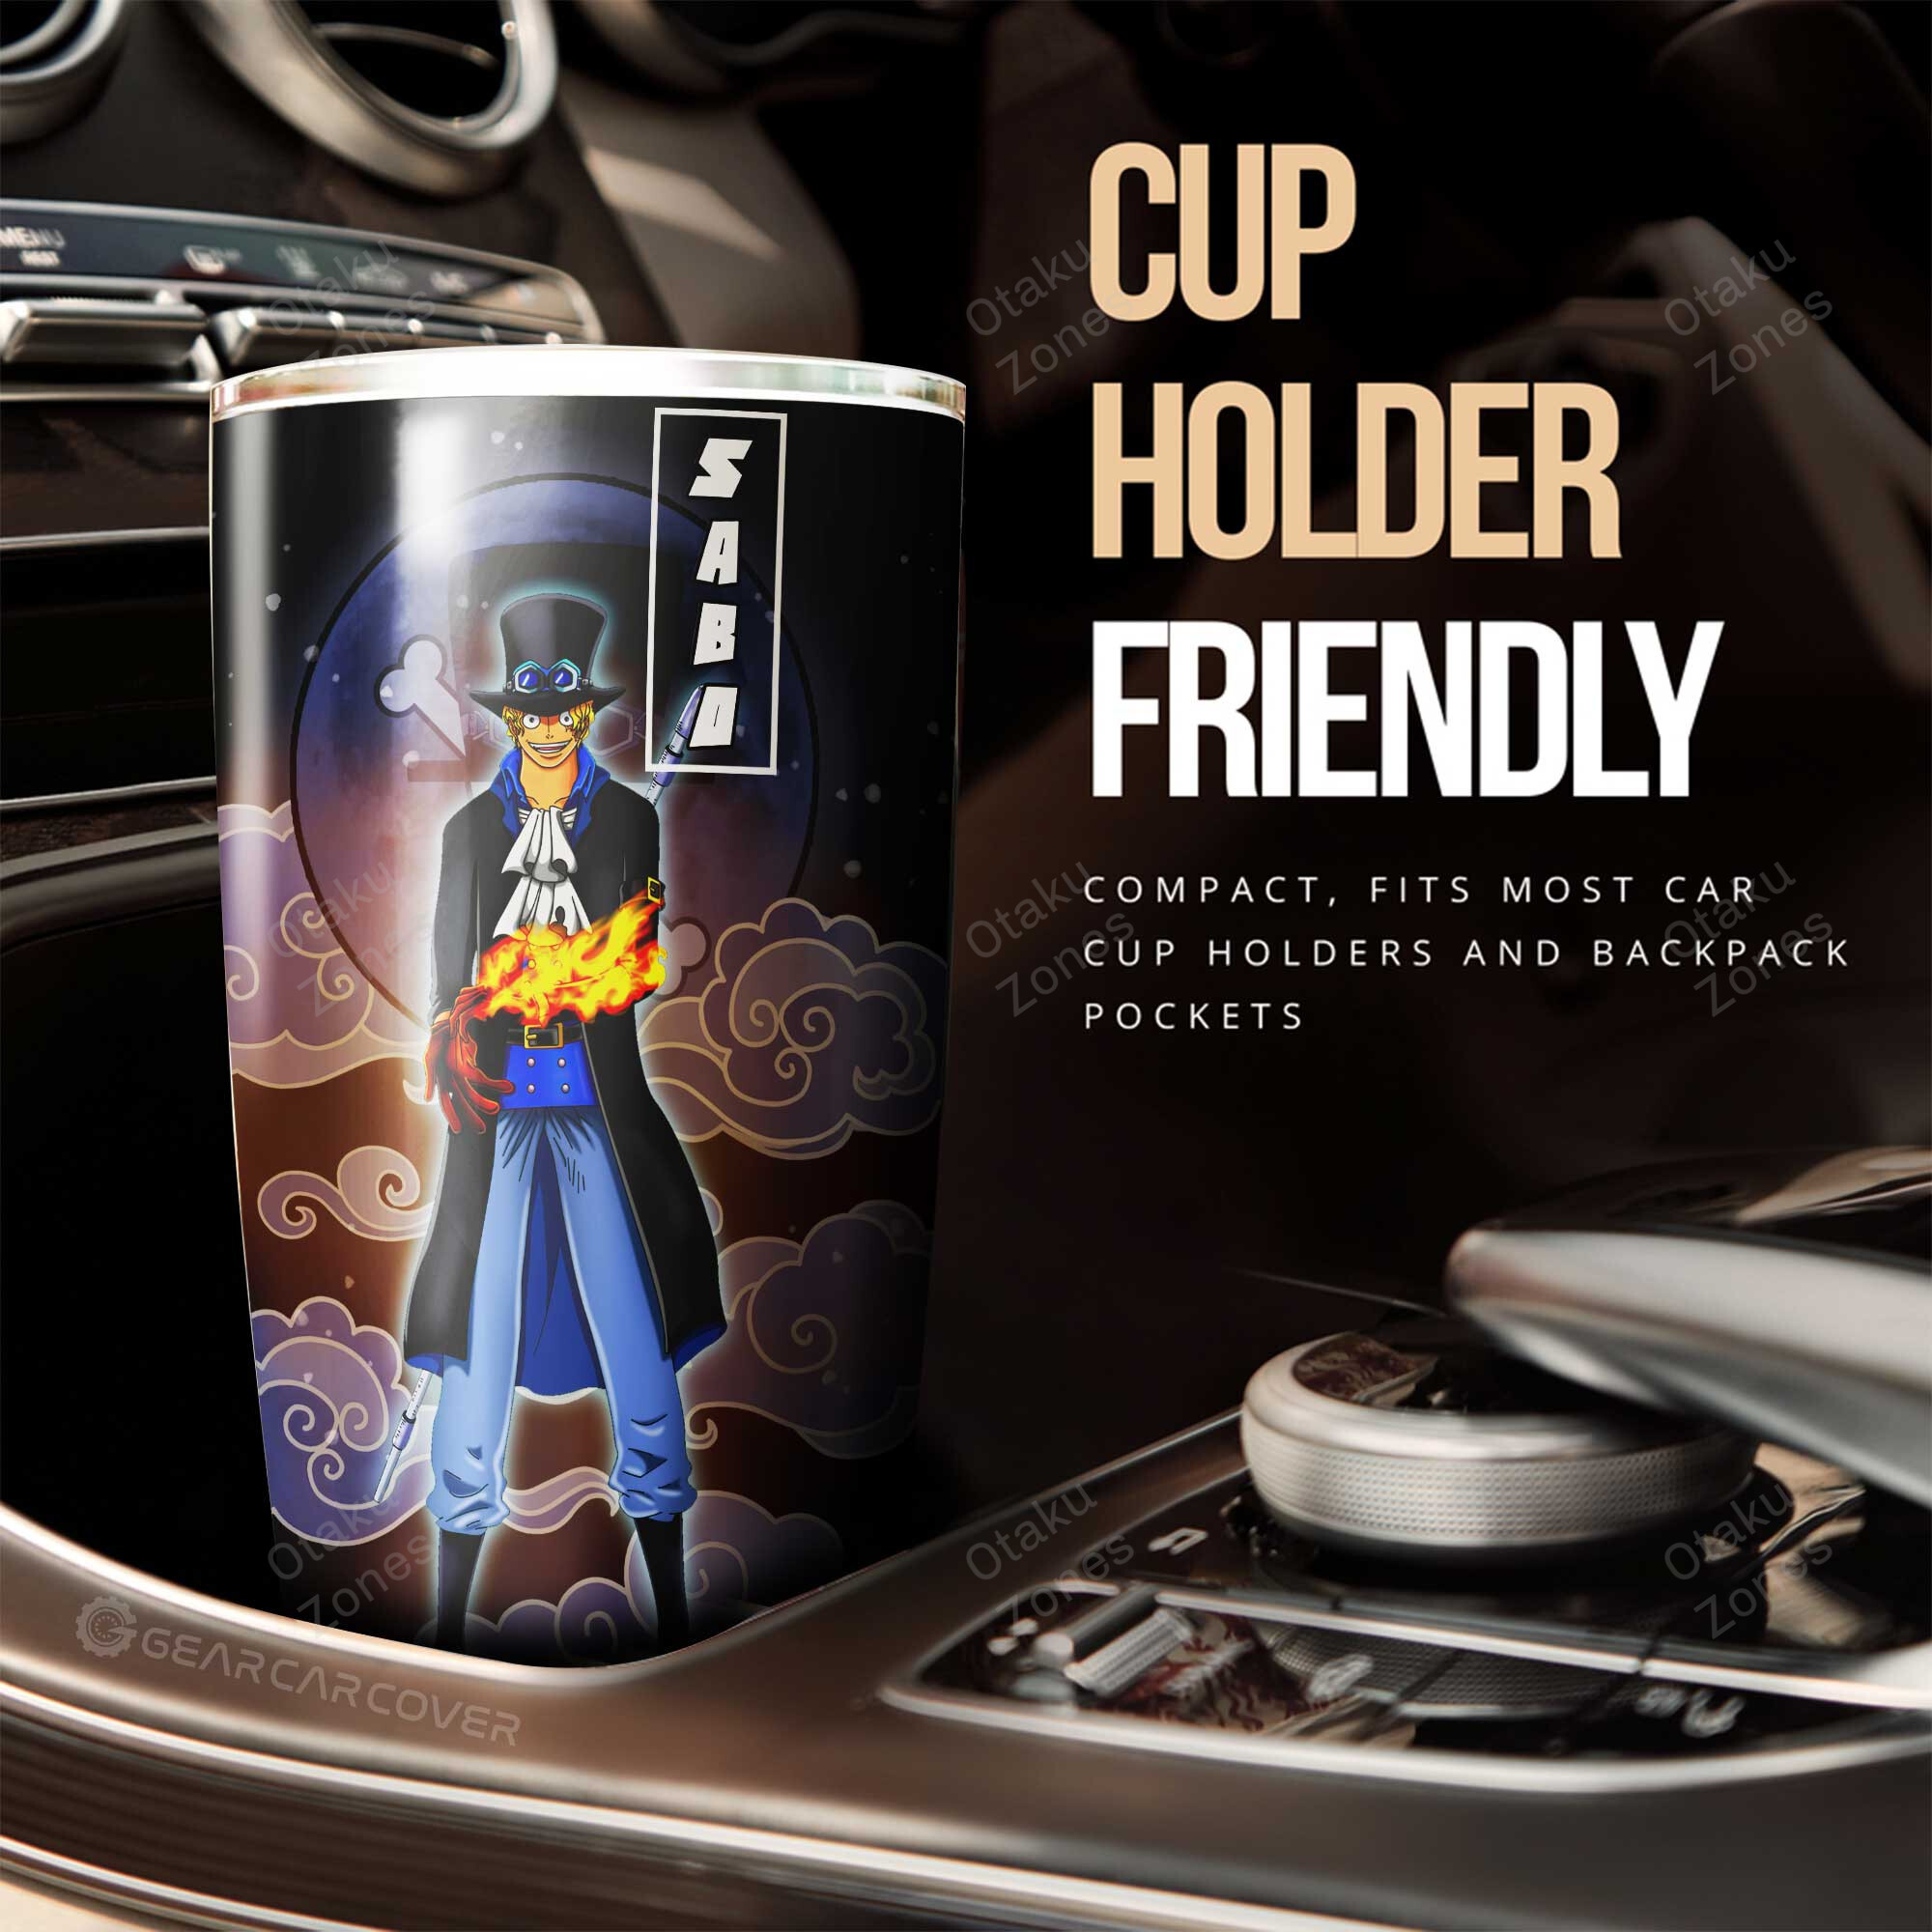 BEST Sabo One Piece Tumbler Cup2